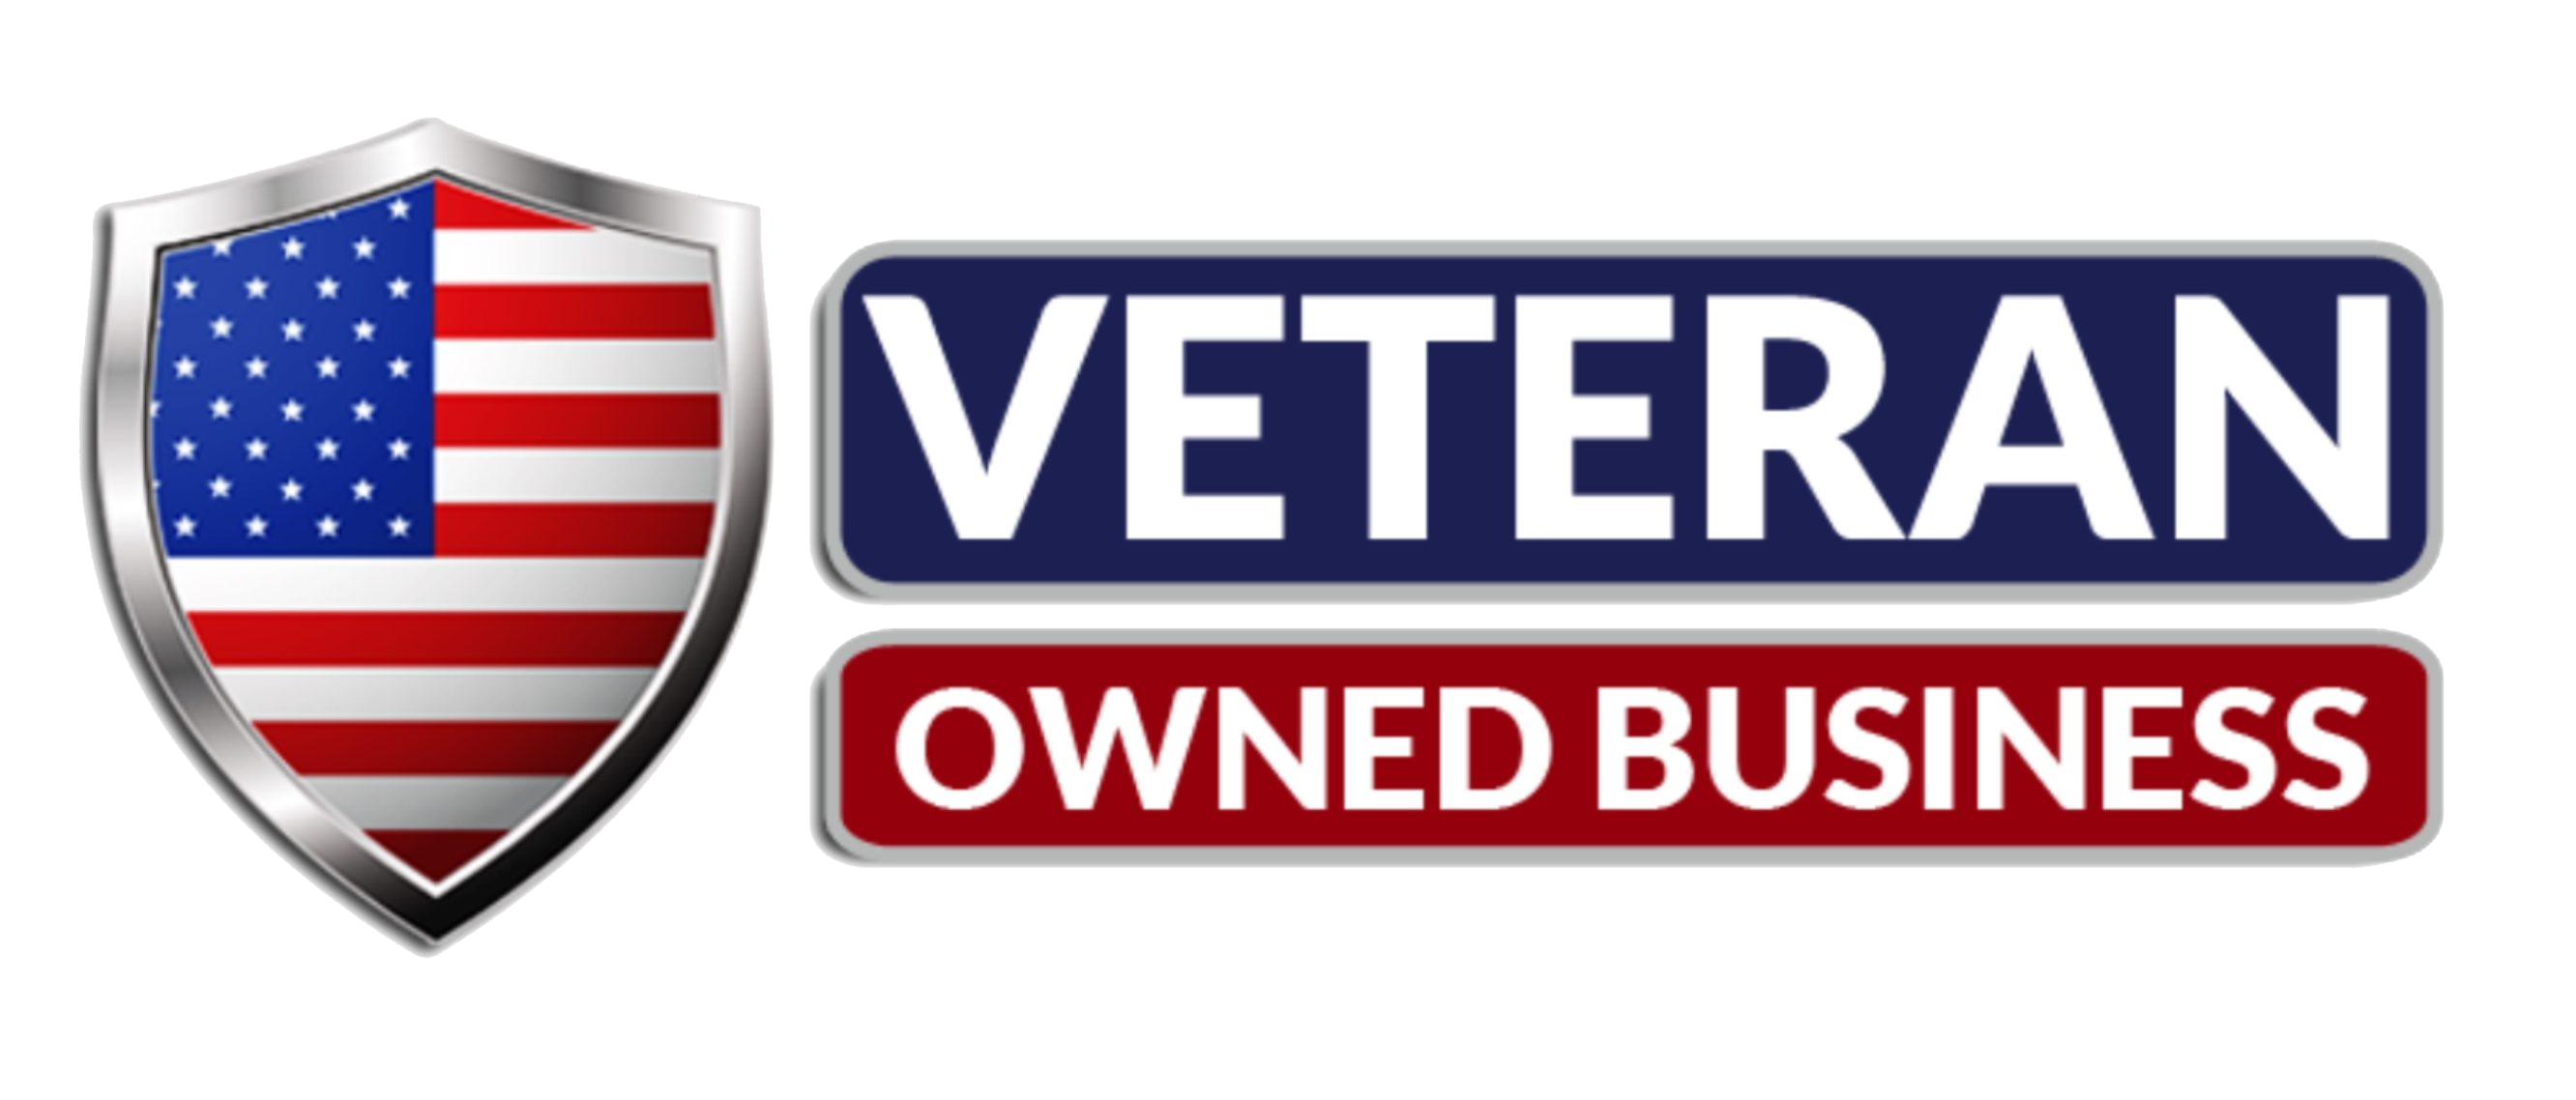 Veteran Owned Home Inspection Business